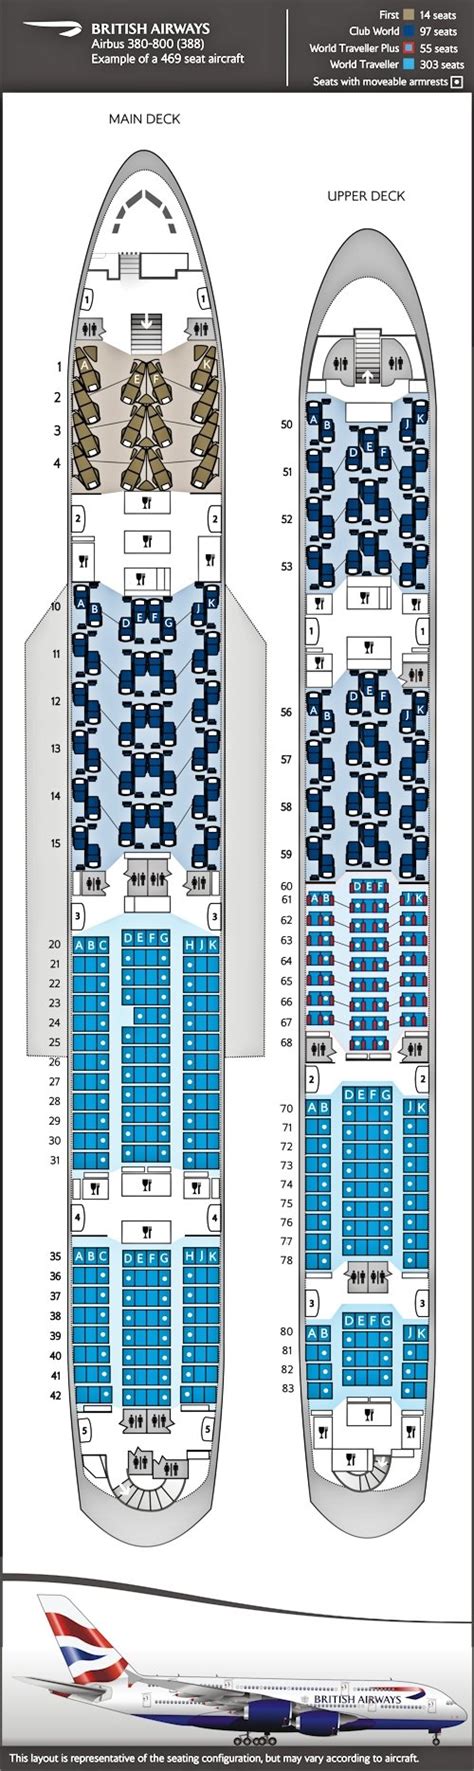 Ba plane seat plan. There are three corresponding types: 77H: twenty rows numbered 5-7 and 8-24. There are no 18AK or 24AK seats. This aircraft type is uniquely identified as 77W on BA's seat chart. 77L: fourteen rows numbered 1-7 and 8-14. Lavatories located forward of row 1 and forward of seat 10F. 77M: thirteen rows numbered 5-8 and 9-17. 